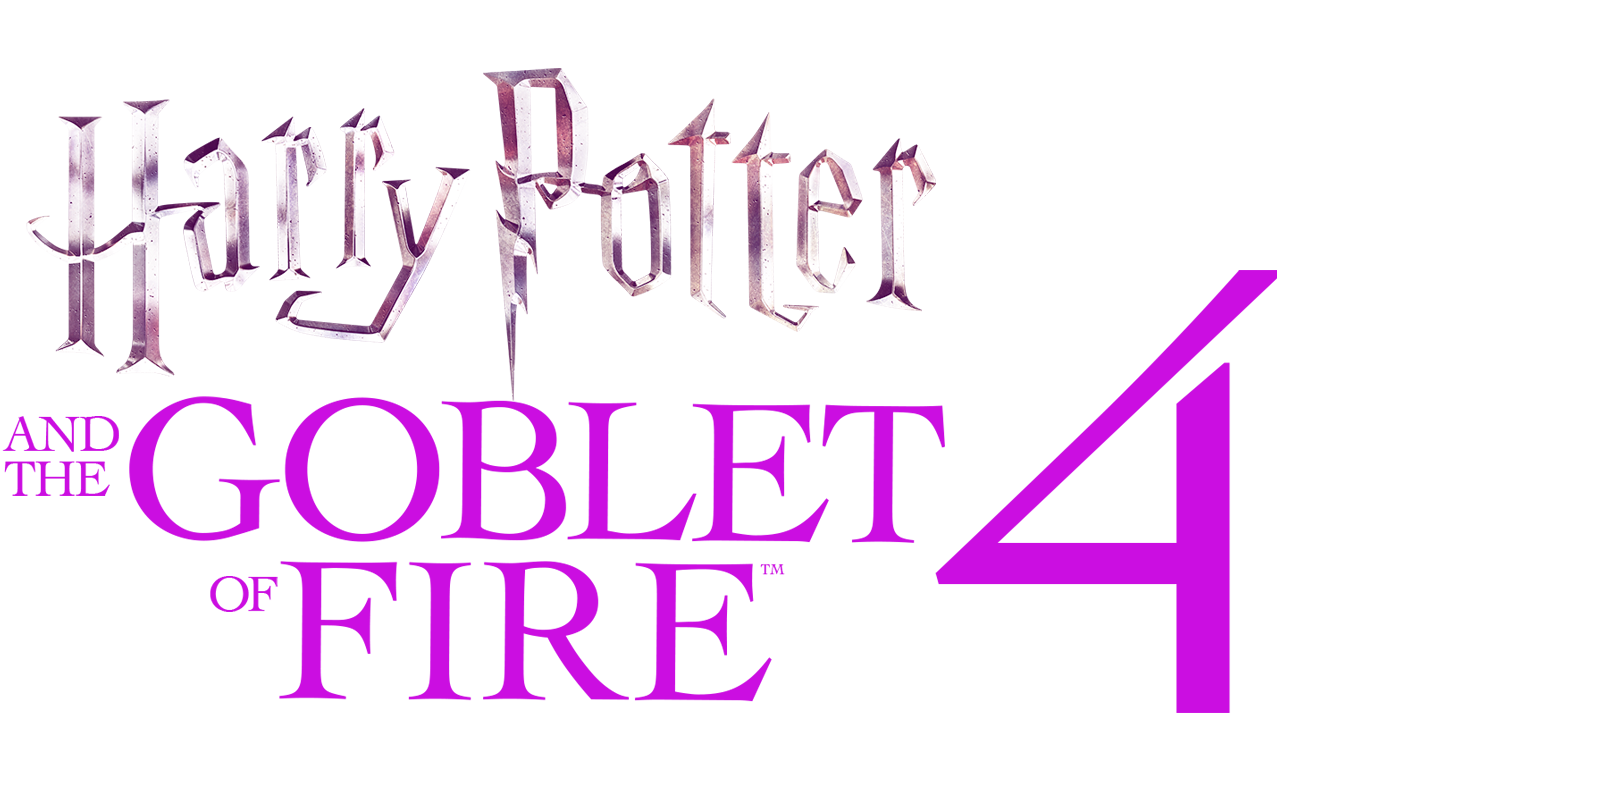 harry potter and the goblet of fire movie full movie